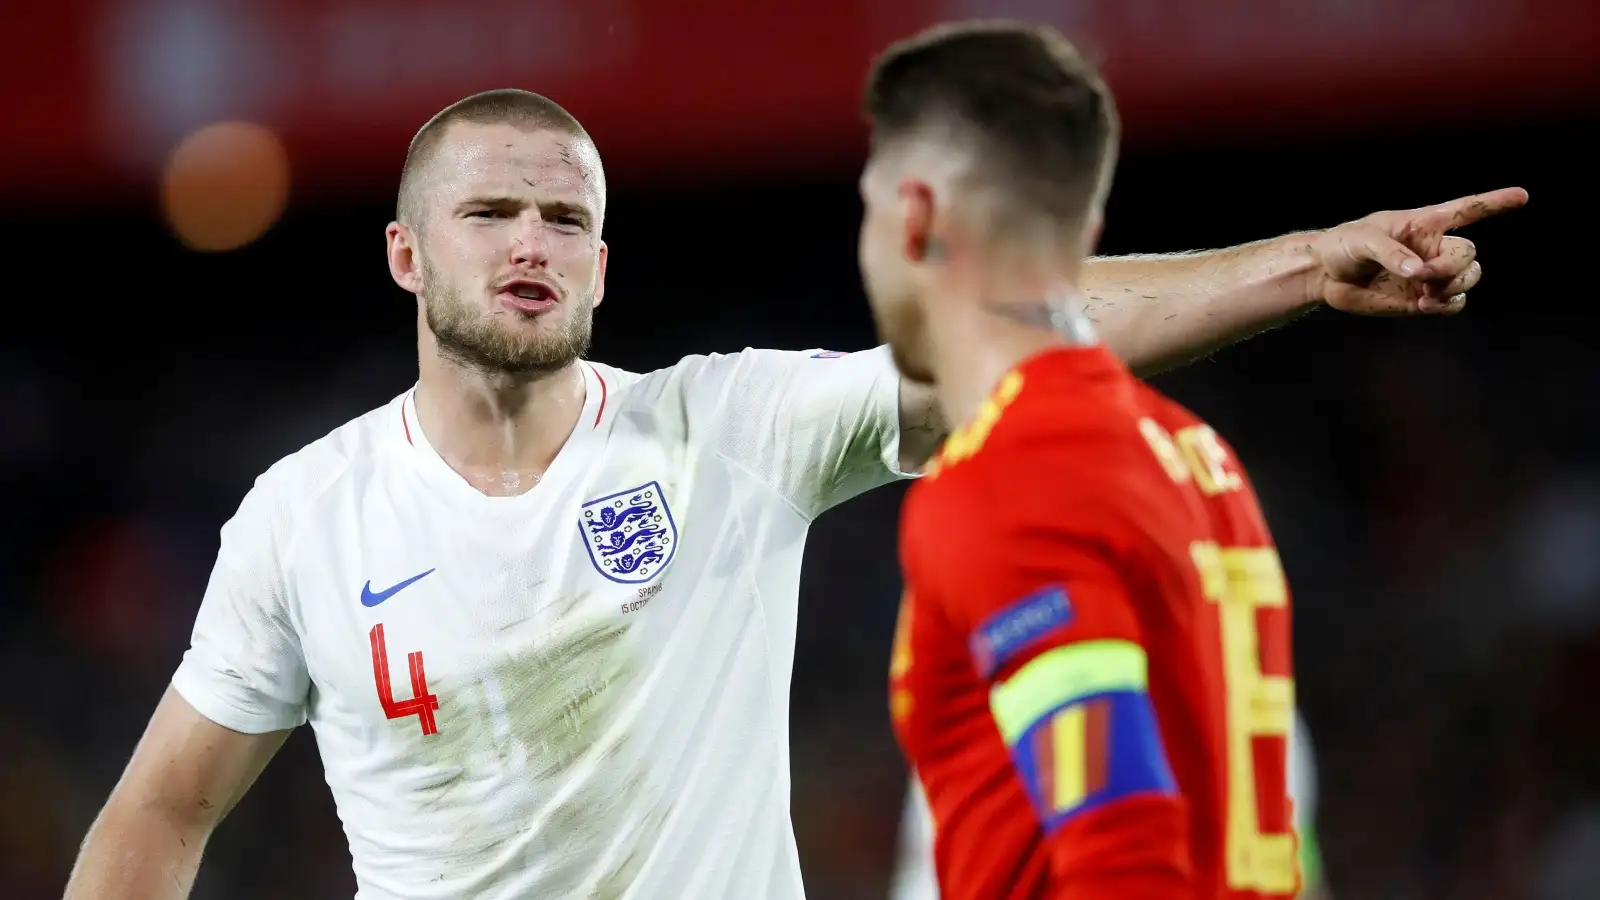 Saluting Eric Dier & his fabulous arse-dumper tackle on Sergio Ramos